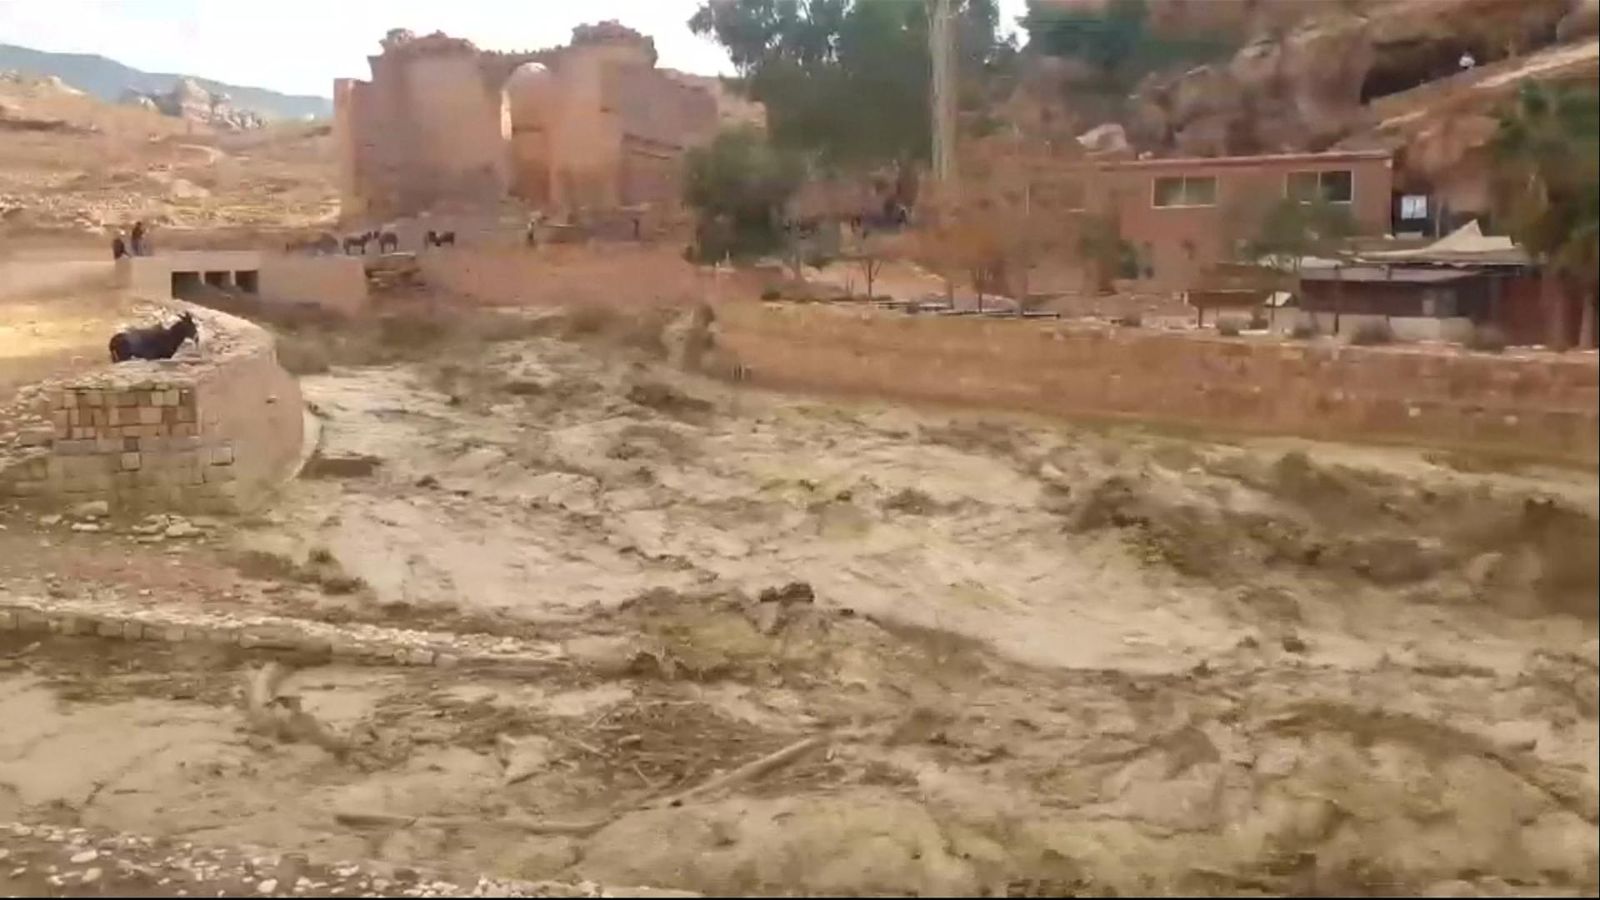 Flash flooding hits historic Jordan city of Petra two weeks after